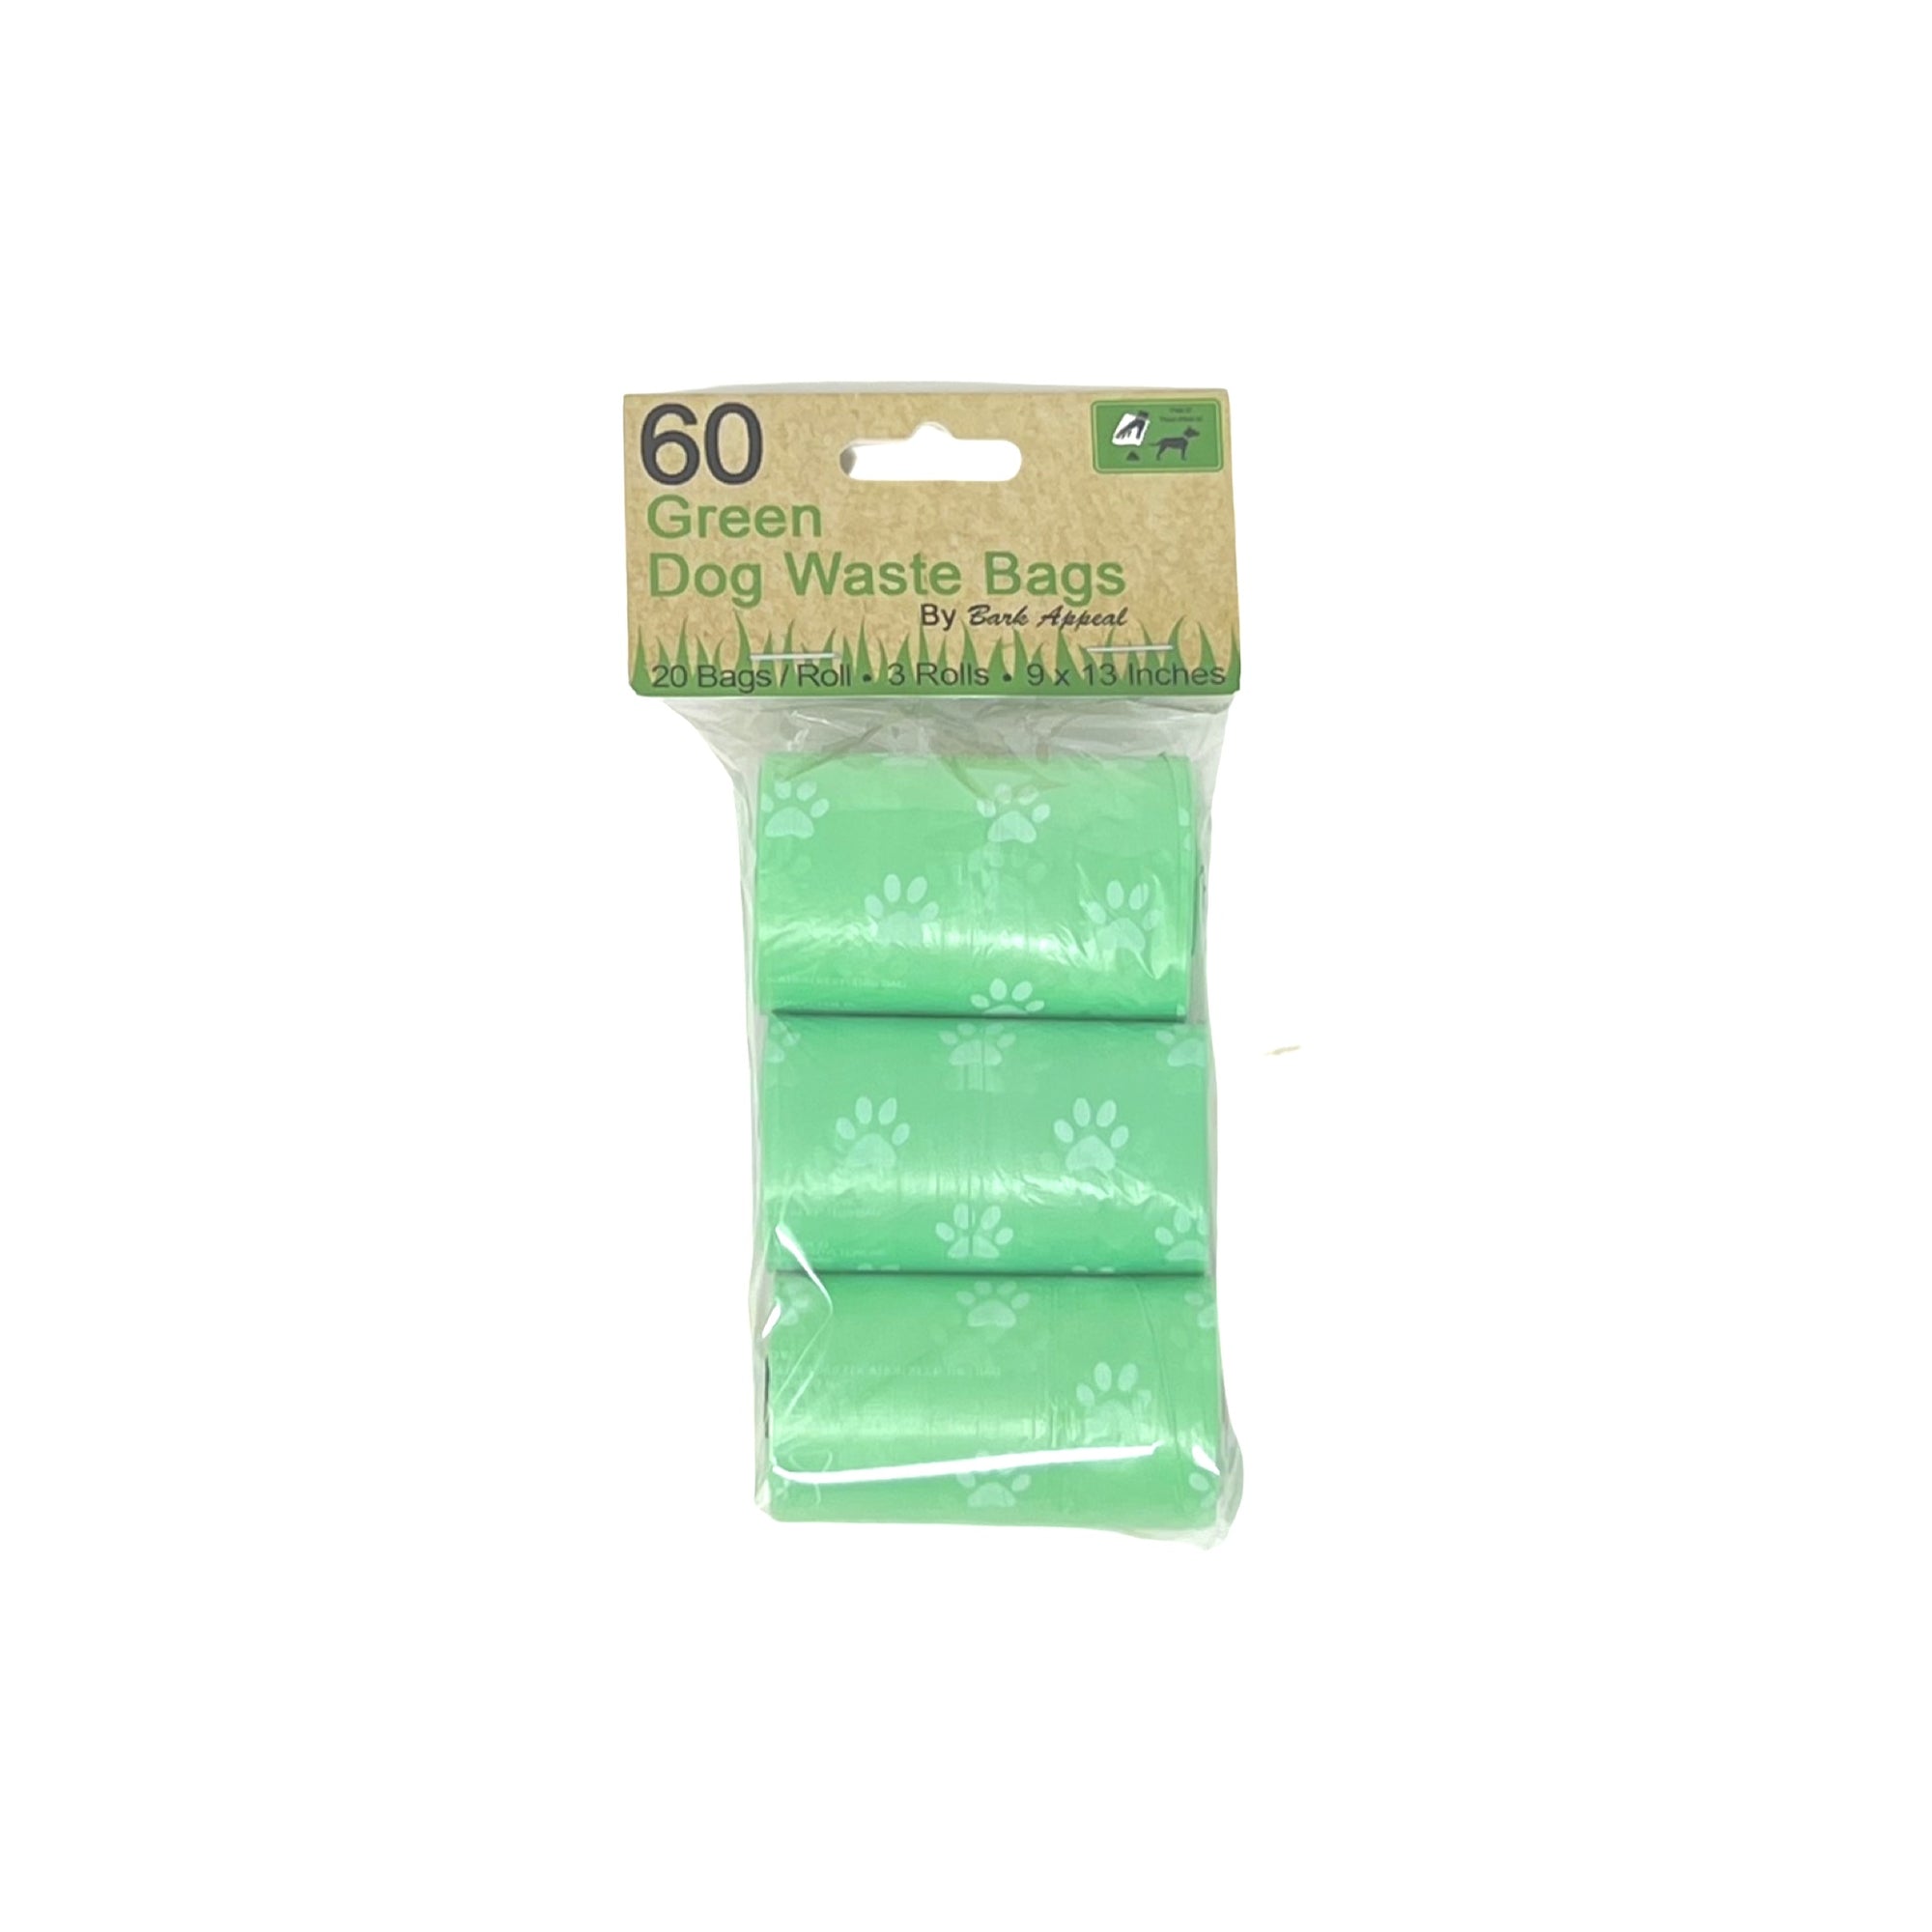 Doggy Poop Bags - 60 count